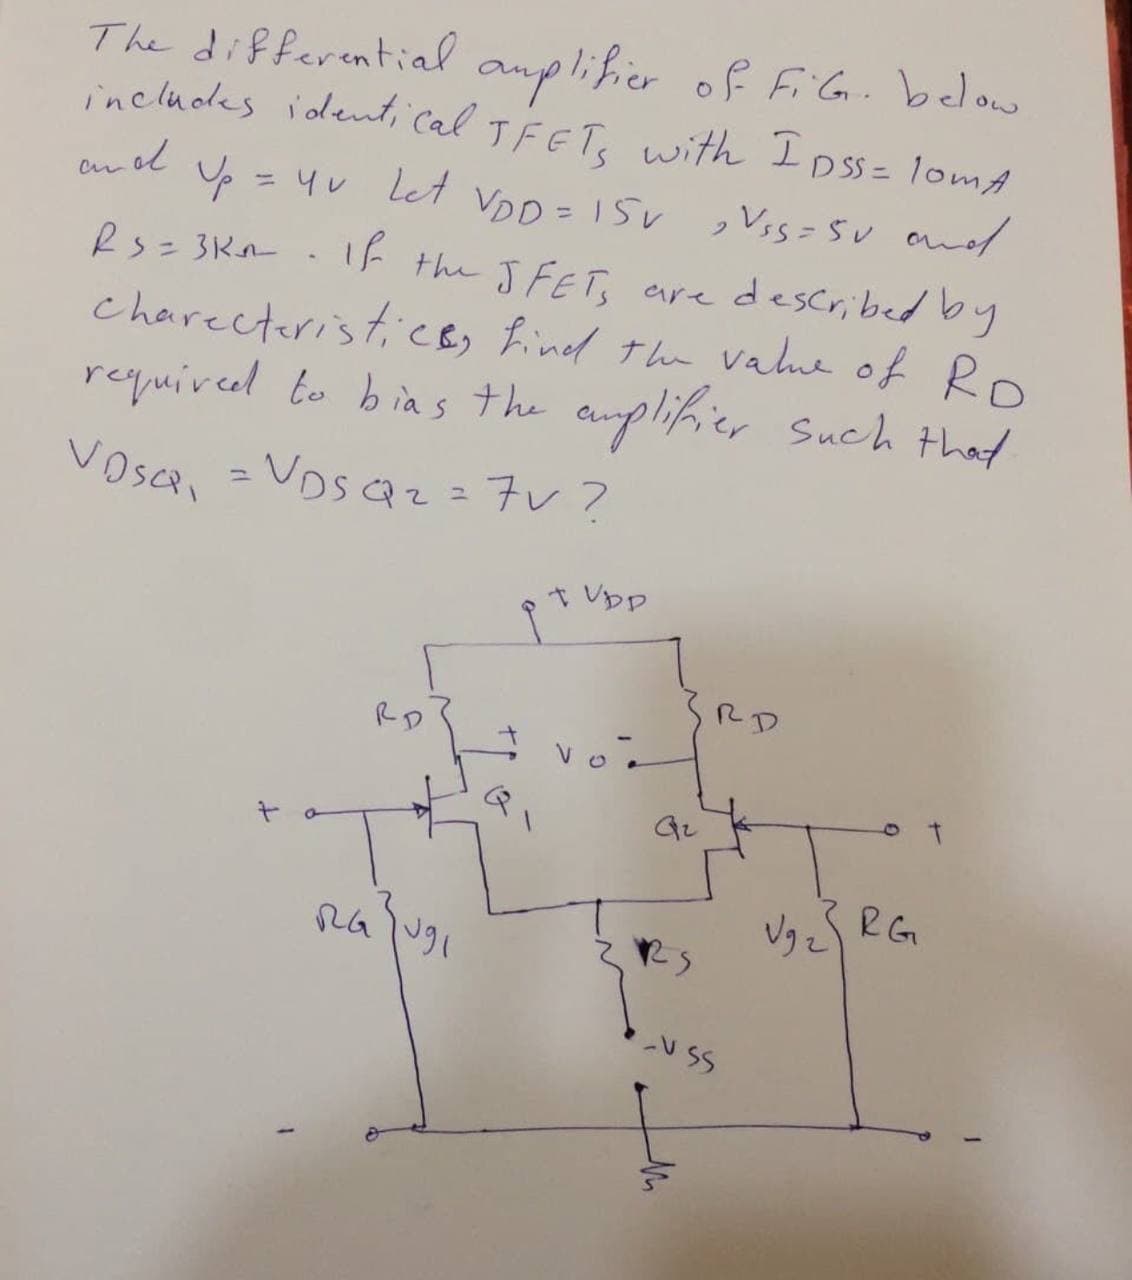 The differential auplifier of FiG. below
includdes ident, Cal TFET, with I Dss= 1omA
p = 4v let VoD = 15v ,Vss=Sv and
Rs= 3Kn . If the JFET, are described by
charecteristiCB, find the vahe of Ro
required to bias the auplifier Such that
= Vos az = 7v ?
an ol
t Vpp
RD
RD
RG
Vりe
U SS
